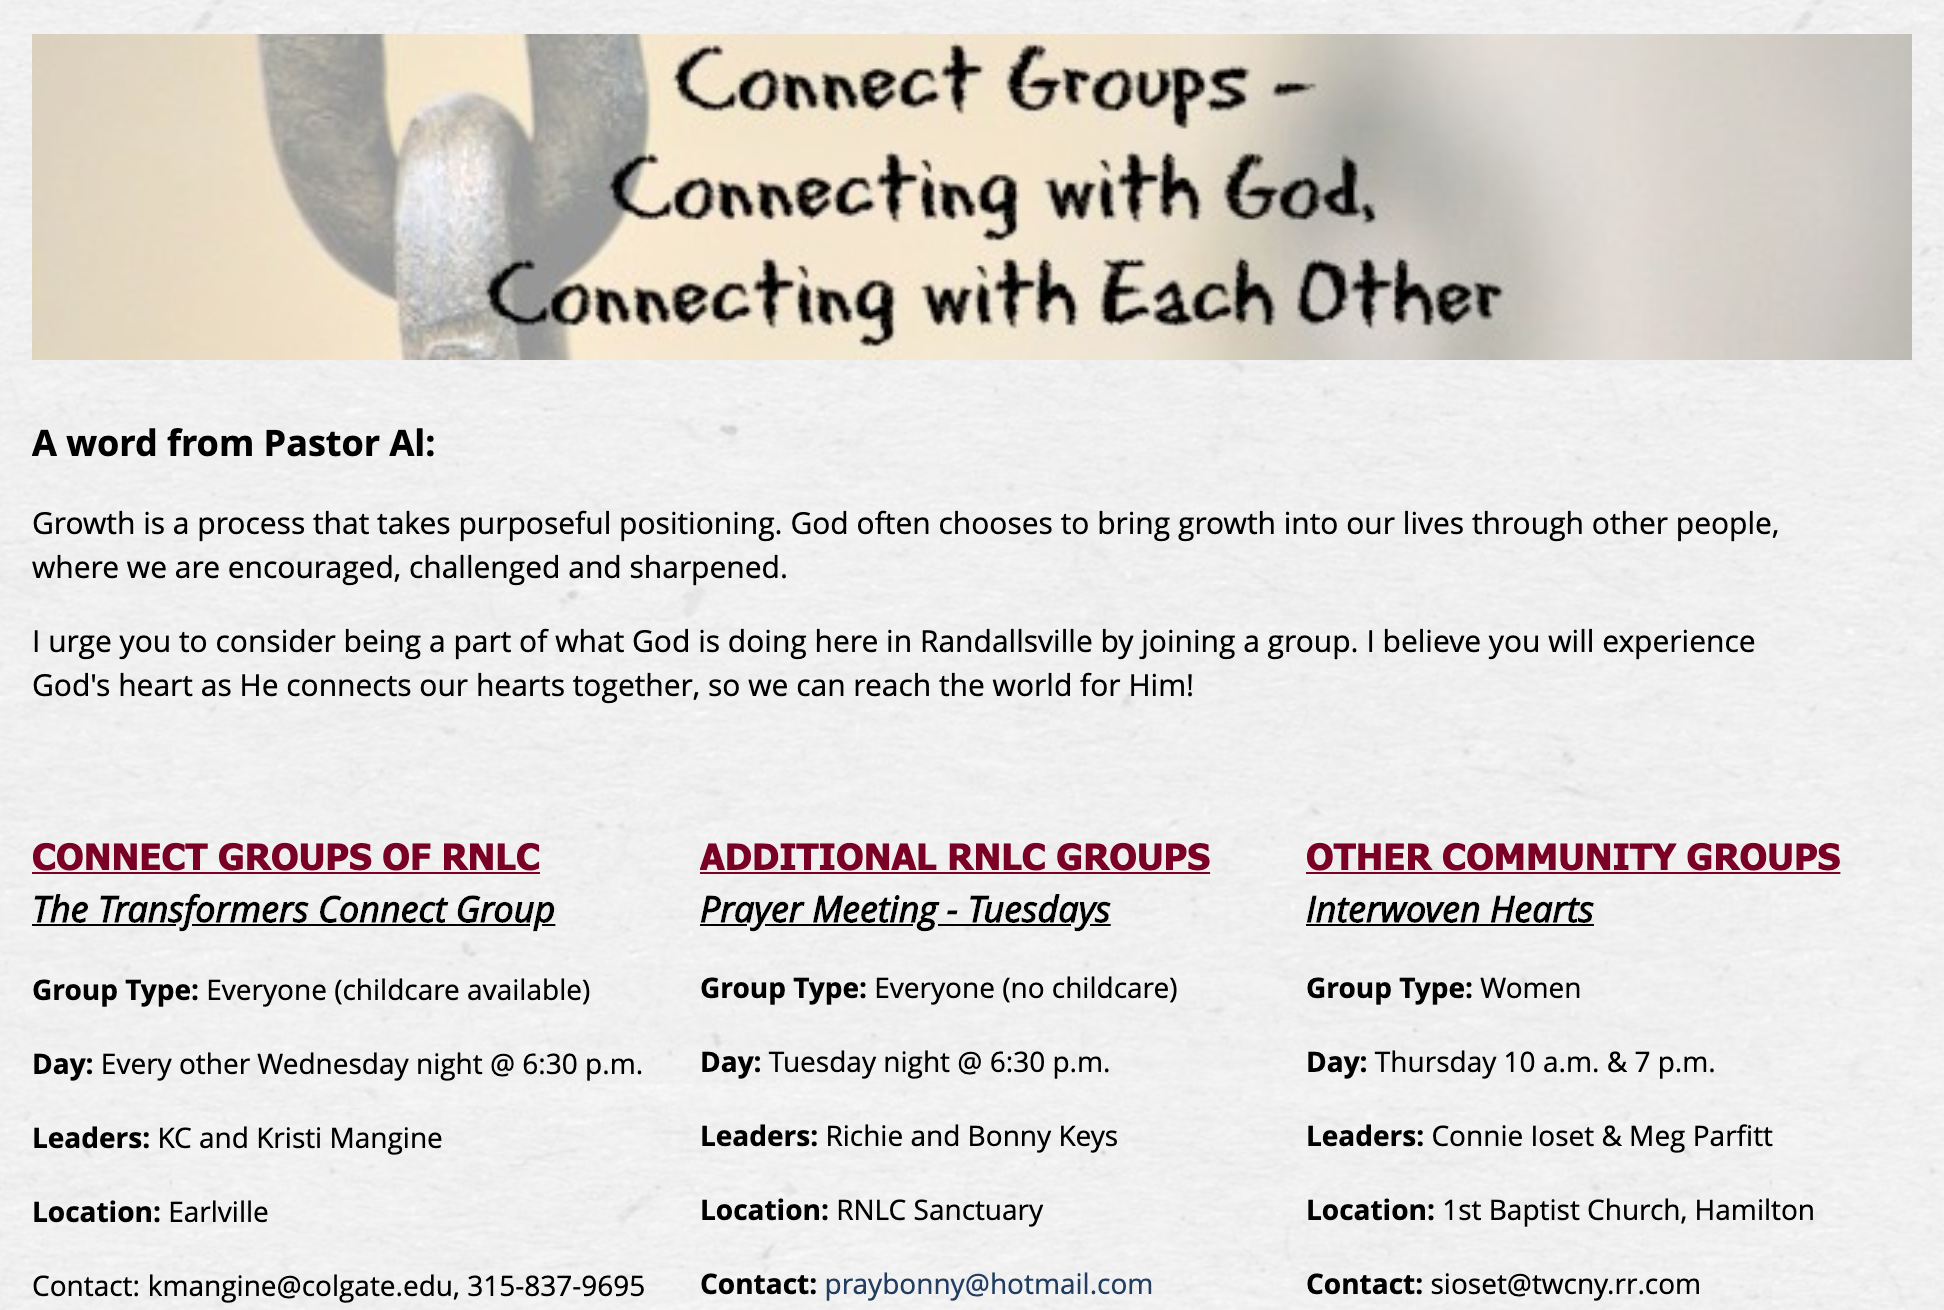 Randallsville New Life Church connect groups 